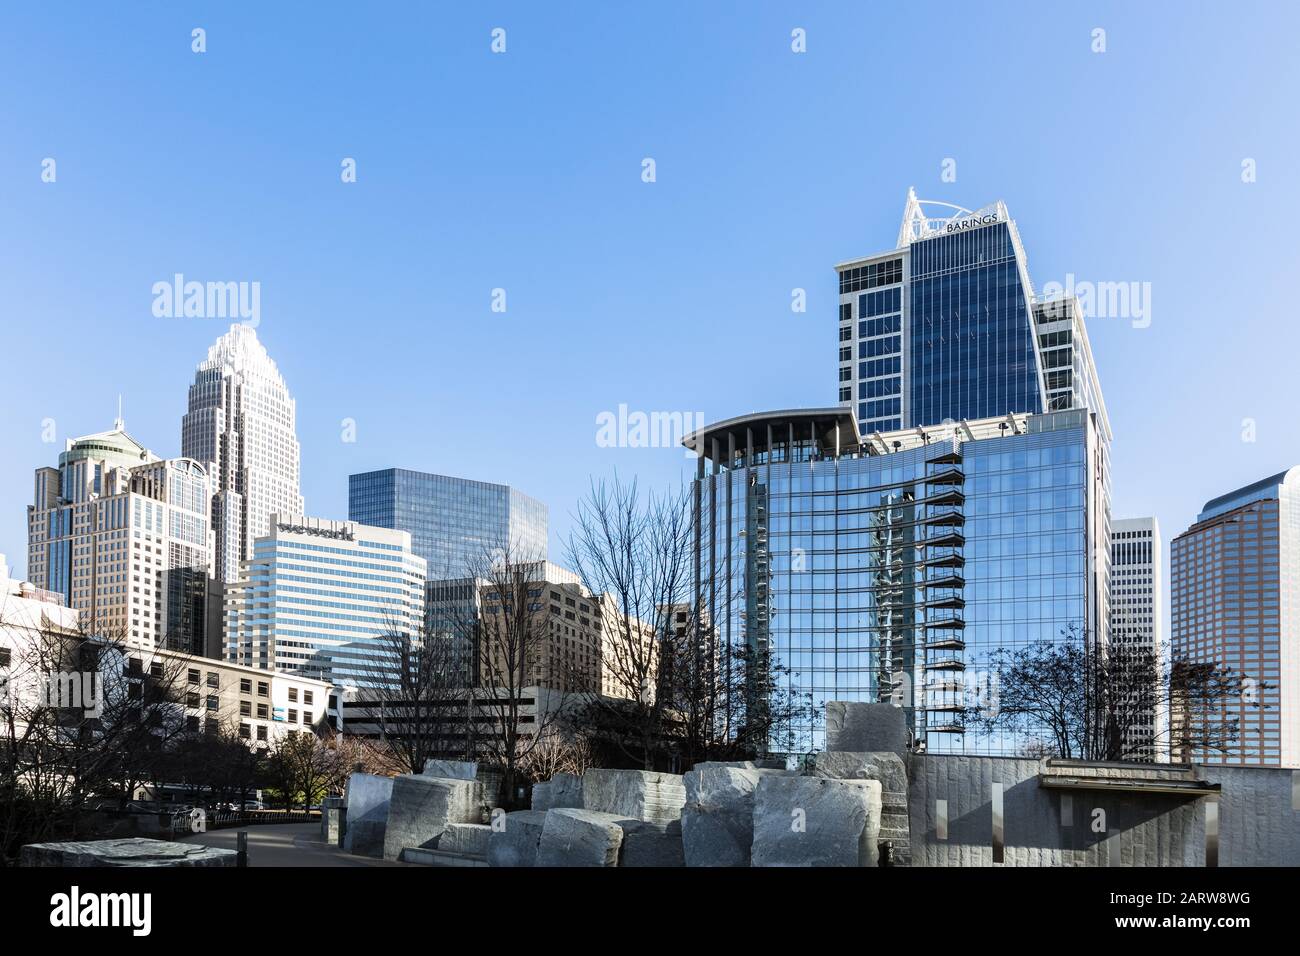 CHARLOTTE, NC, USA-26 JAN 2020: The Charlotte skyline from  Bearden Park in winter, includes  Bank of America Corporate Tower, and the Barings Tower. Stock Photo